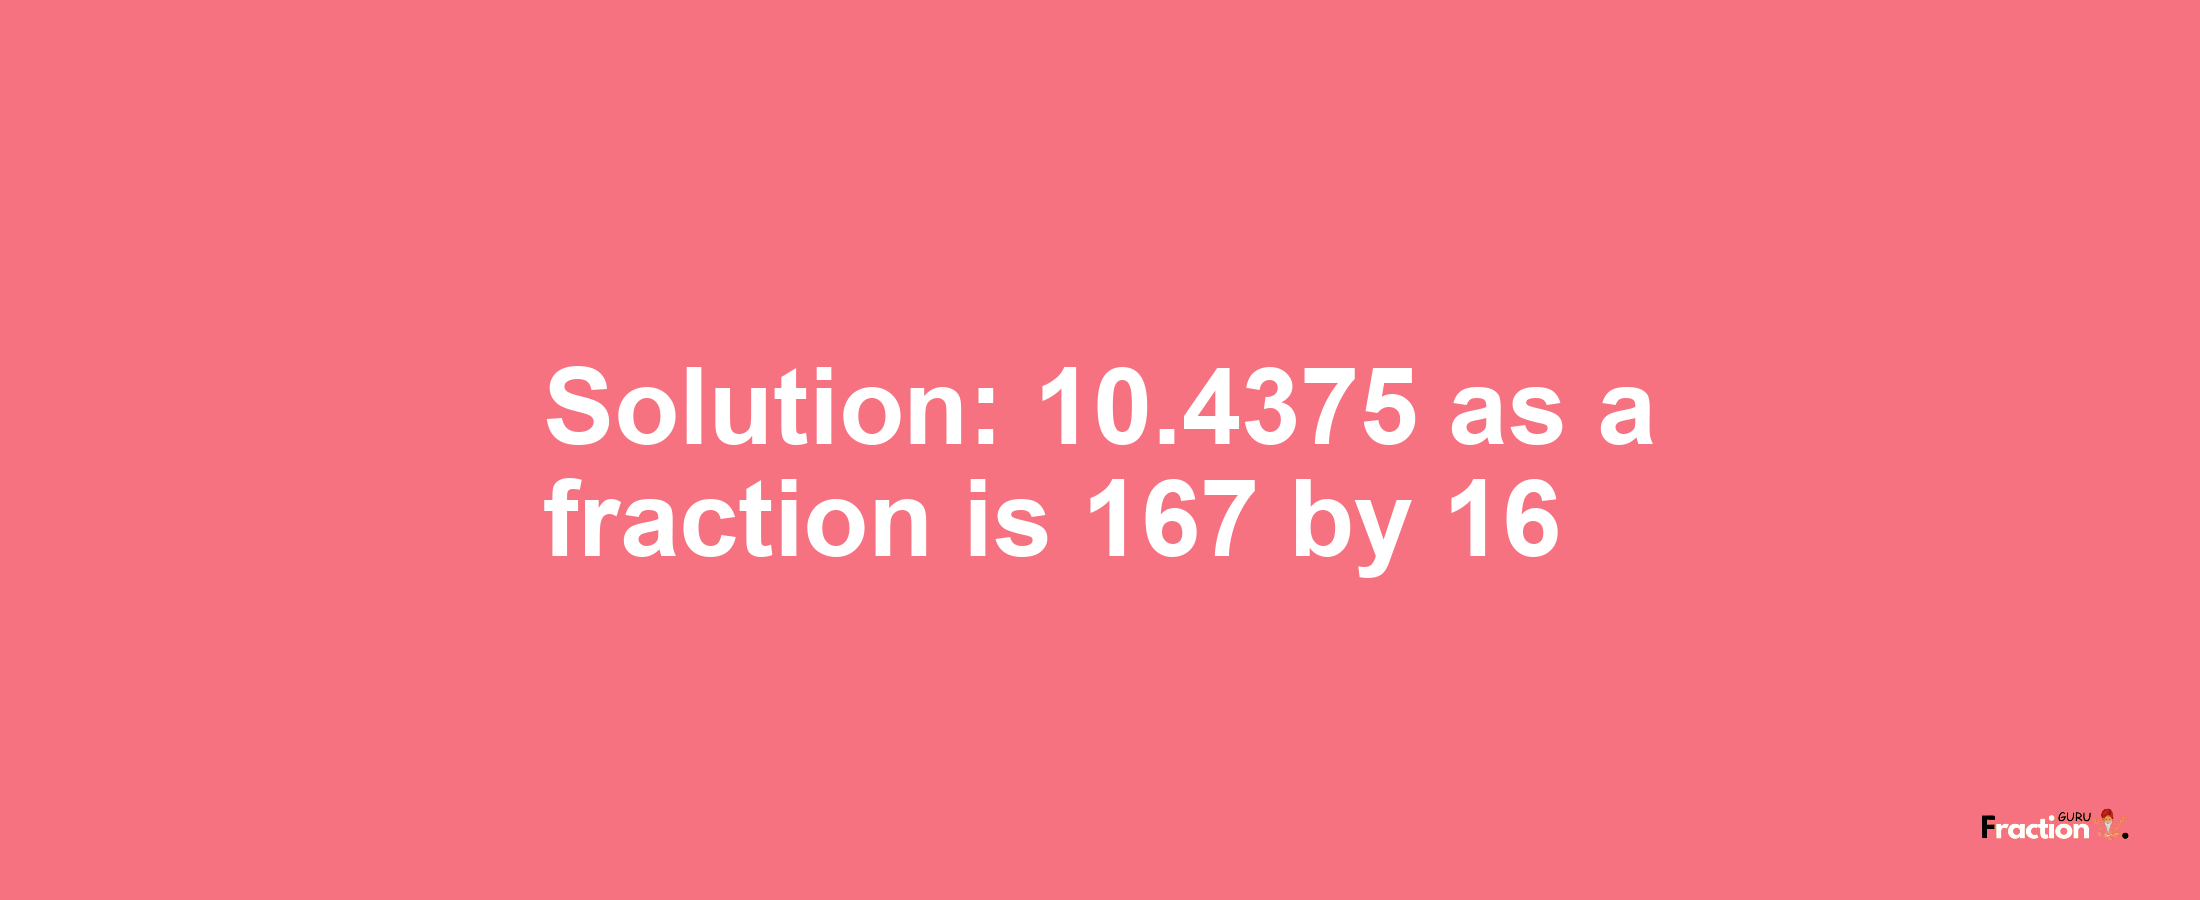 Solution:10.4375 as a fraction is 167/16